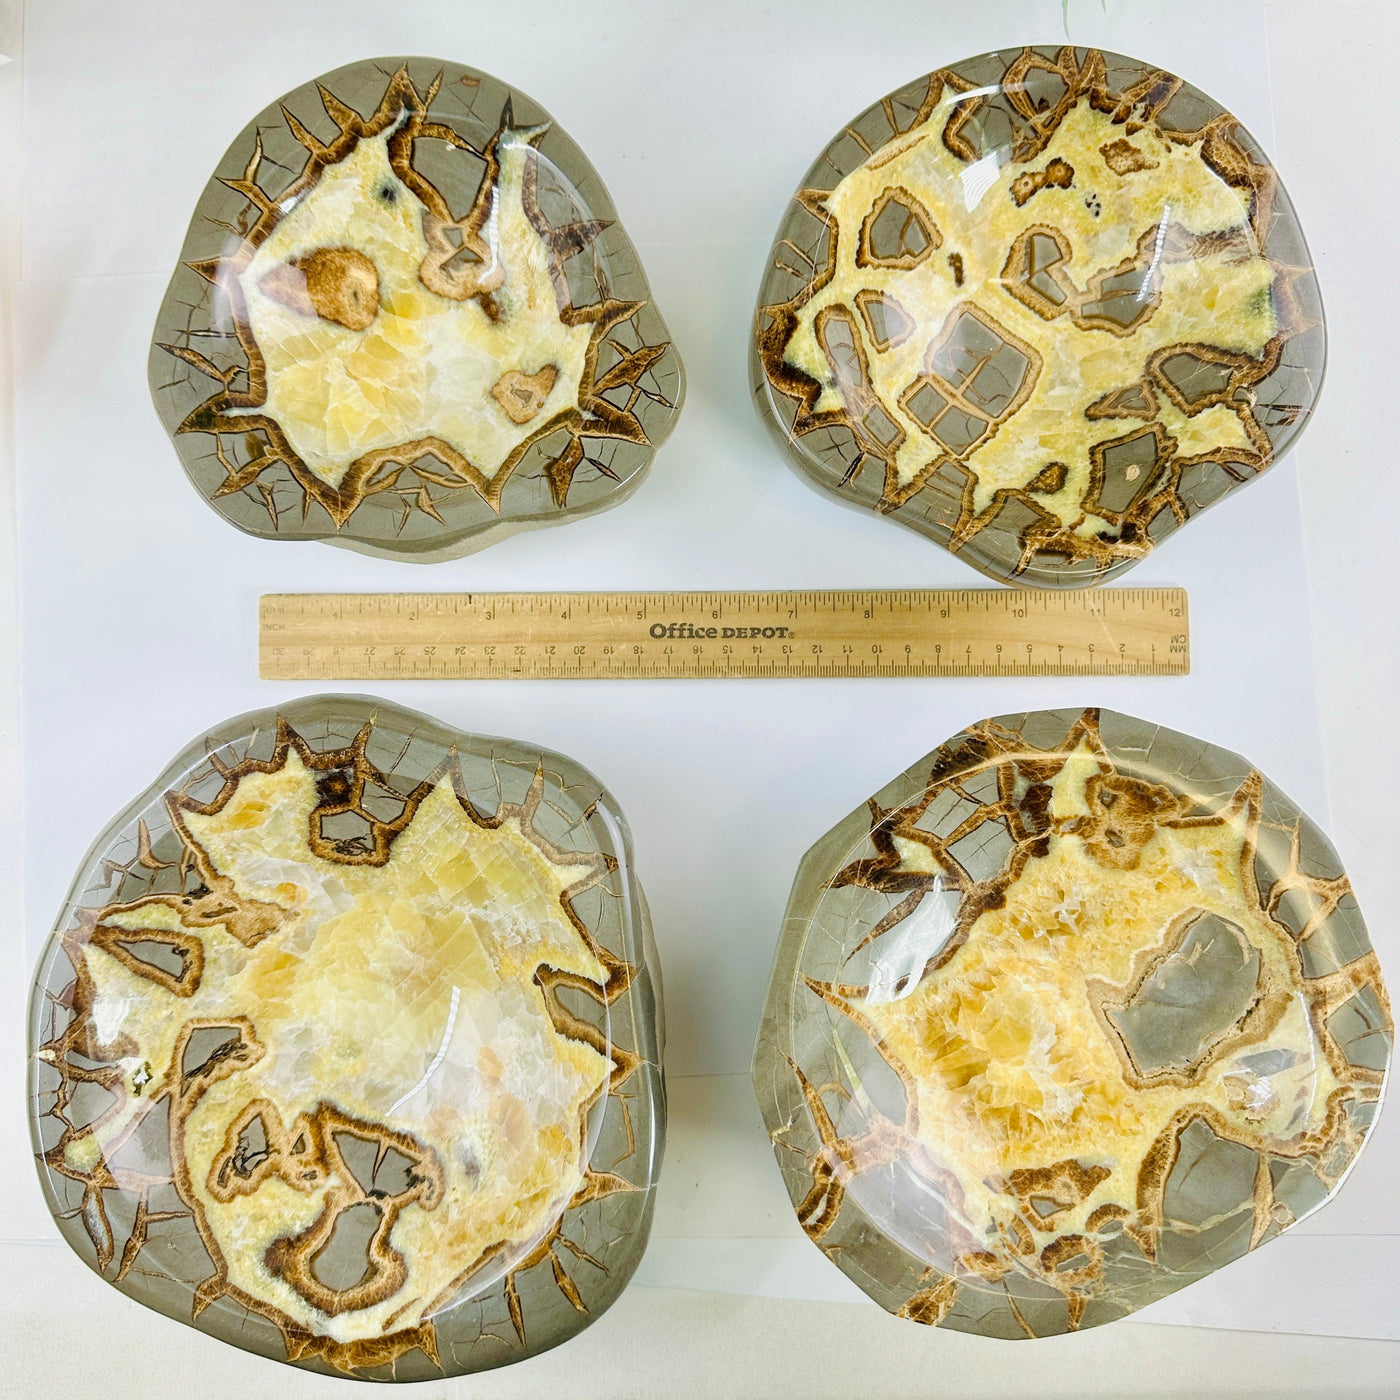 Utah Septarian Polished Crystal Bowls - You Choose - all variants with ruler for size reference